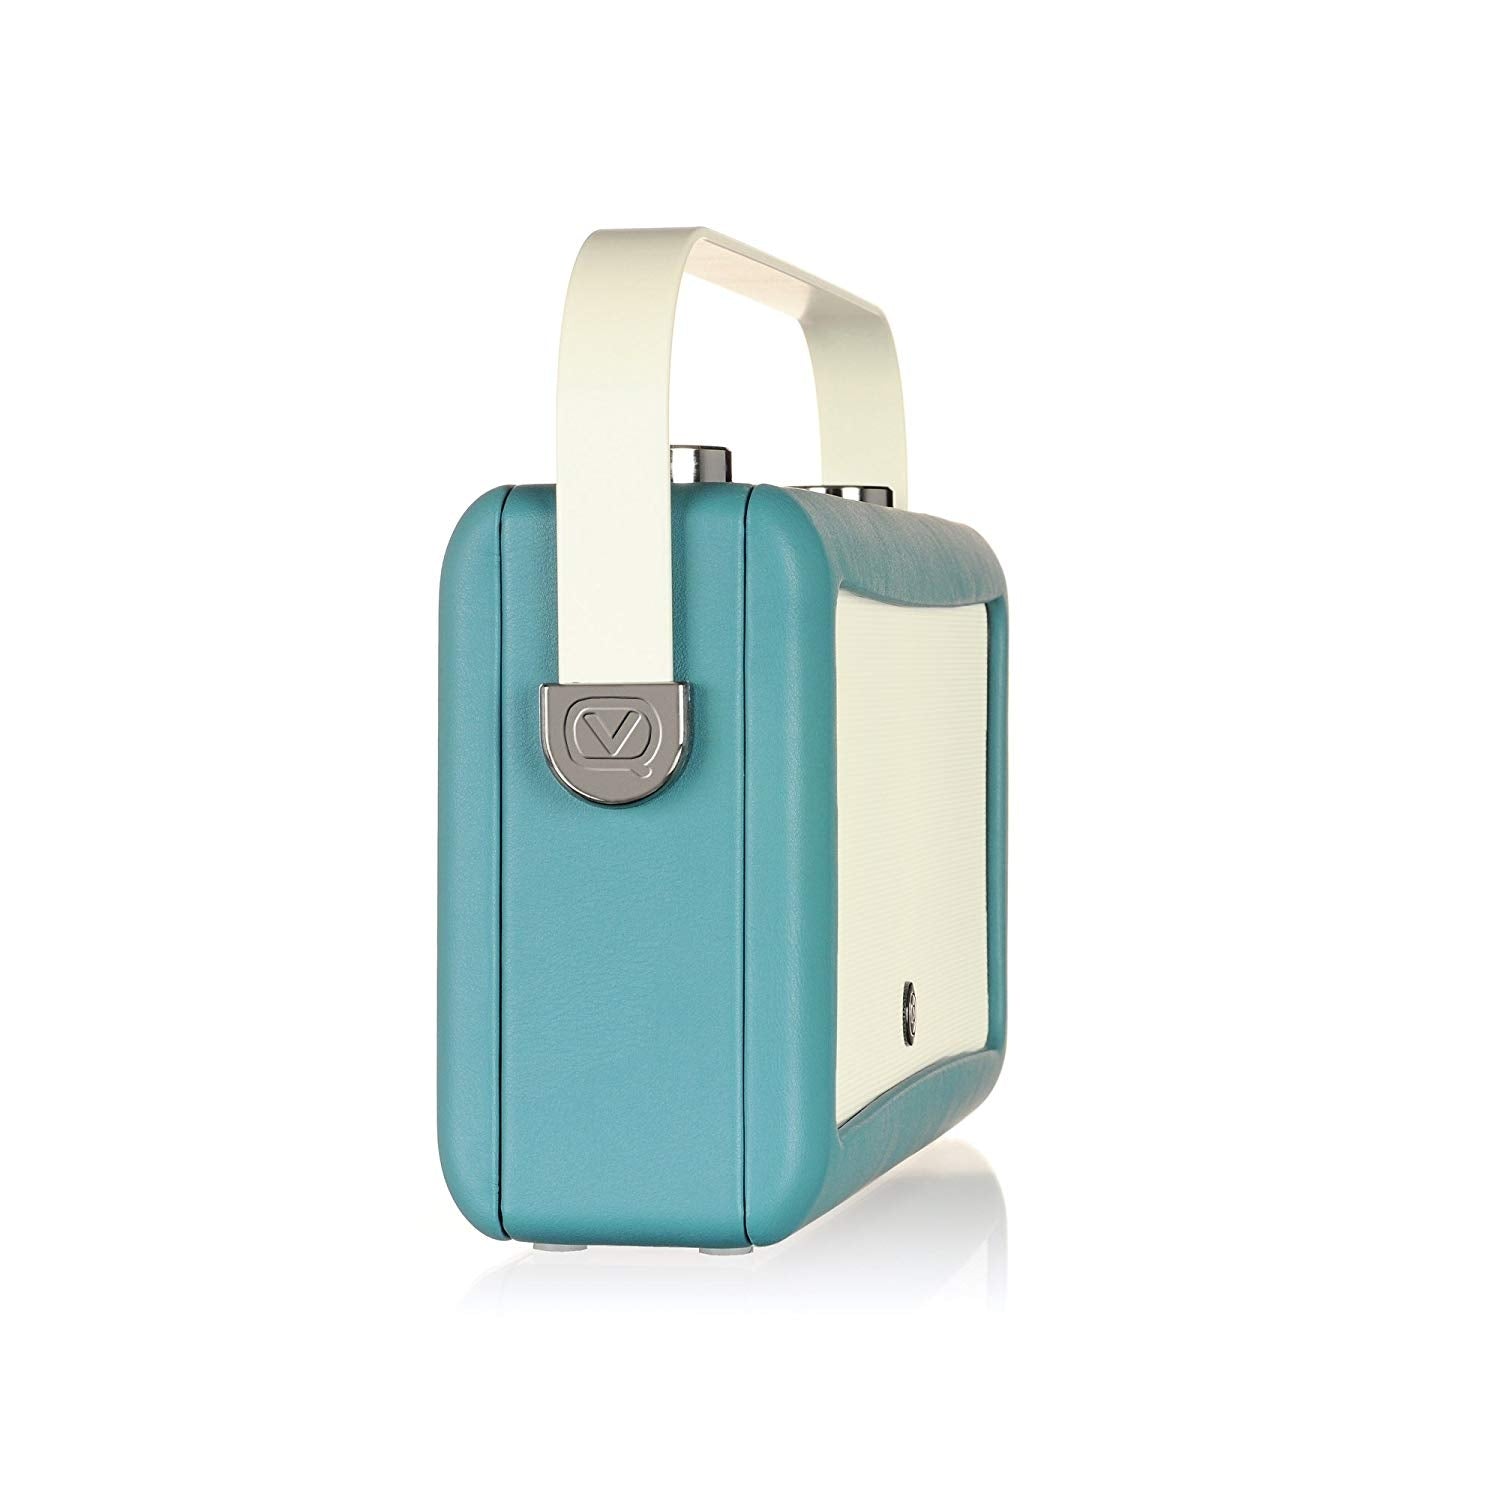 VQ Hepburn Mk II Portable DAB+/FM Radio & Bluetooth Speaker with Rechargeable Battery Pack in Teal - 4